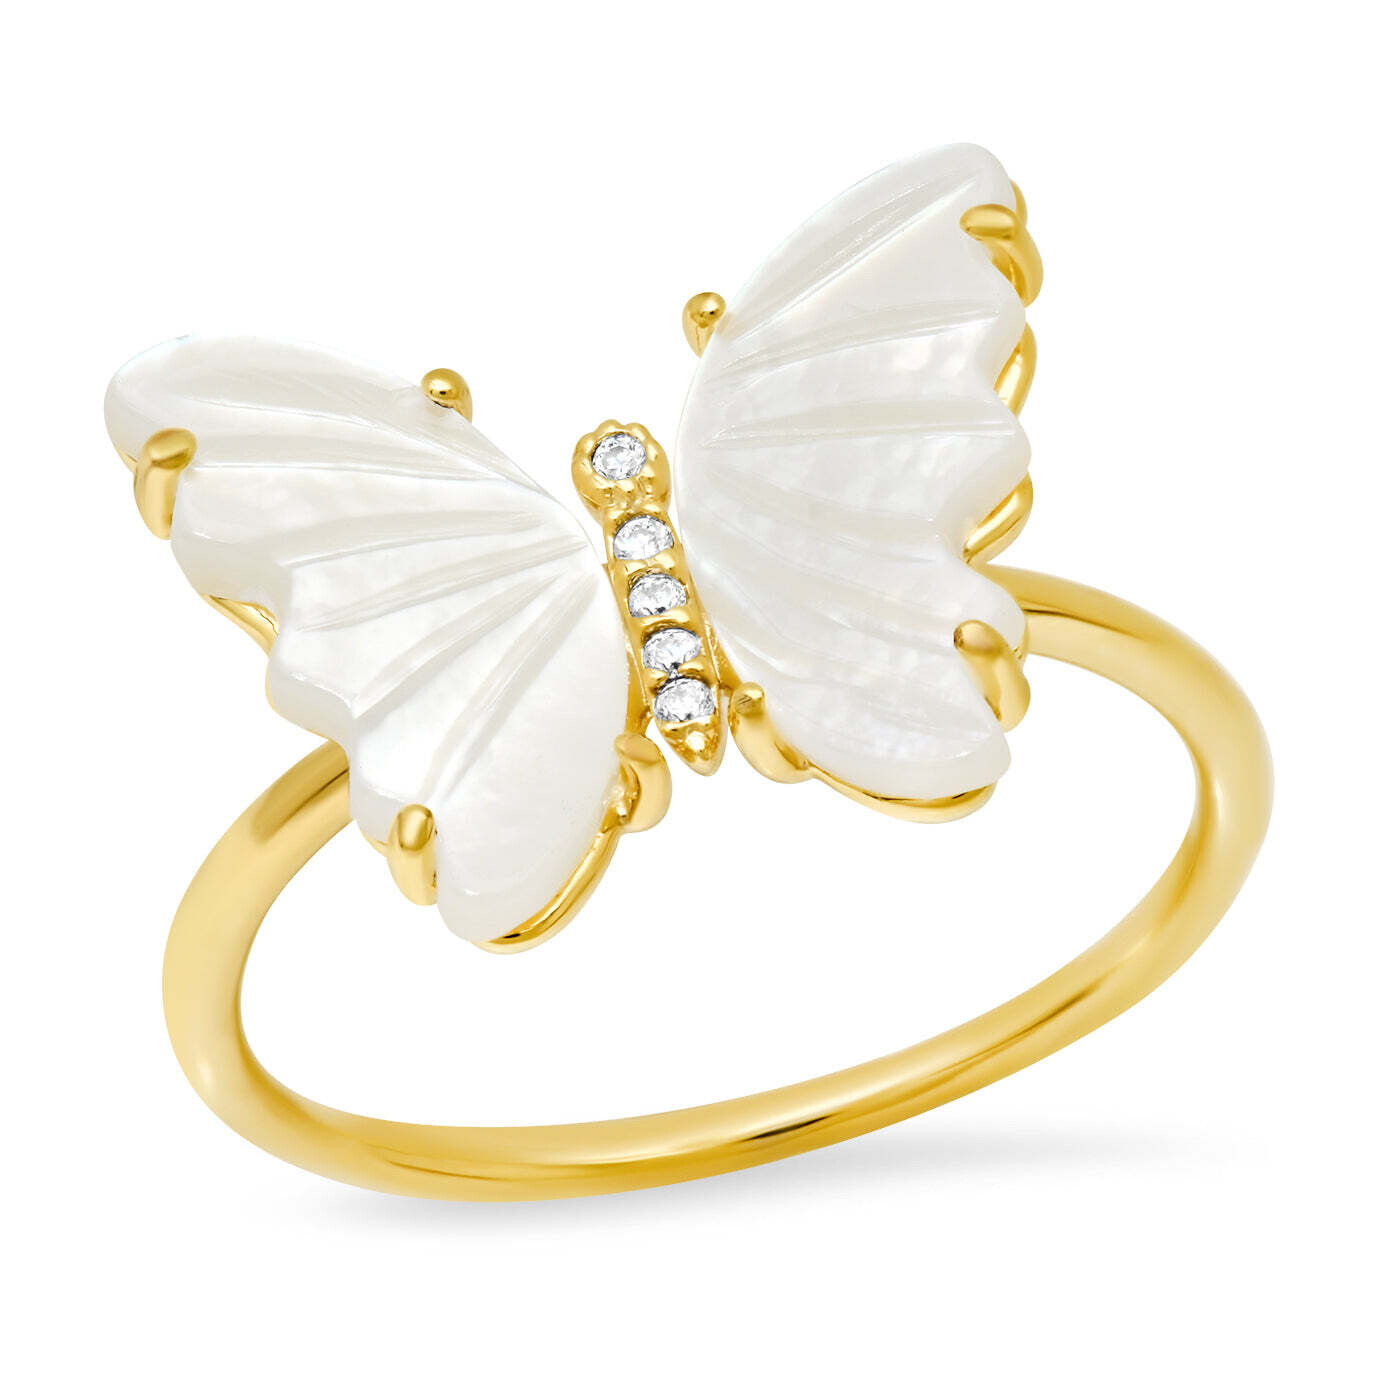 TAI - Butterfly RIng